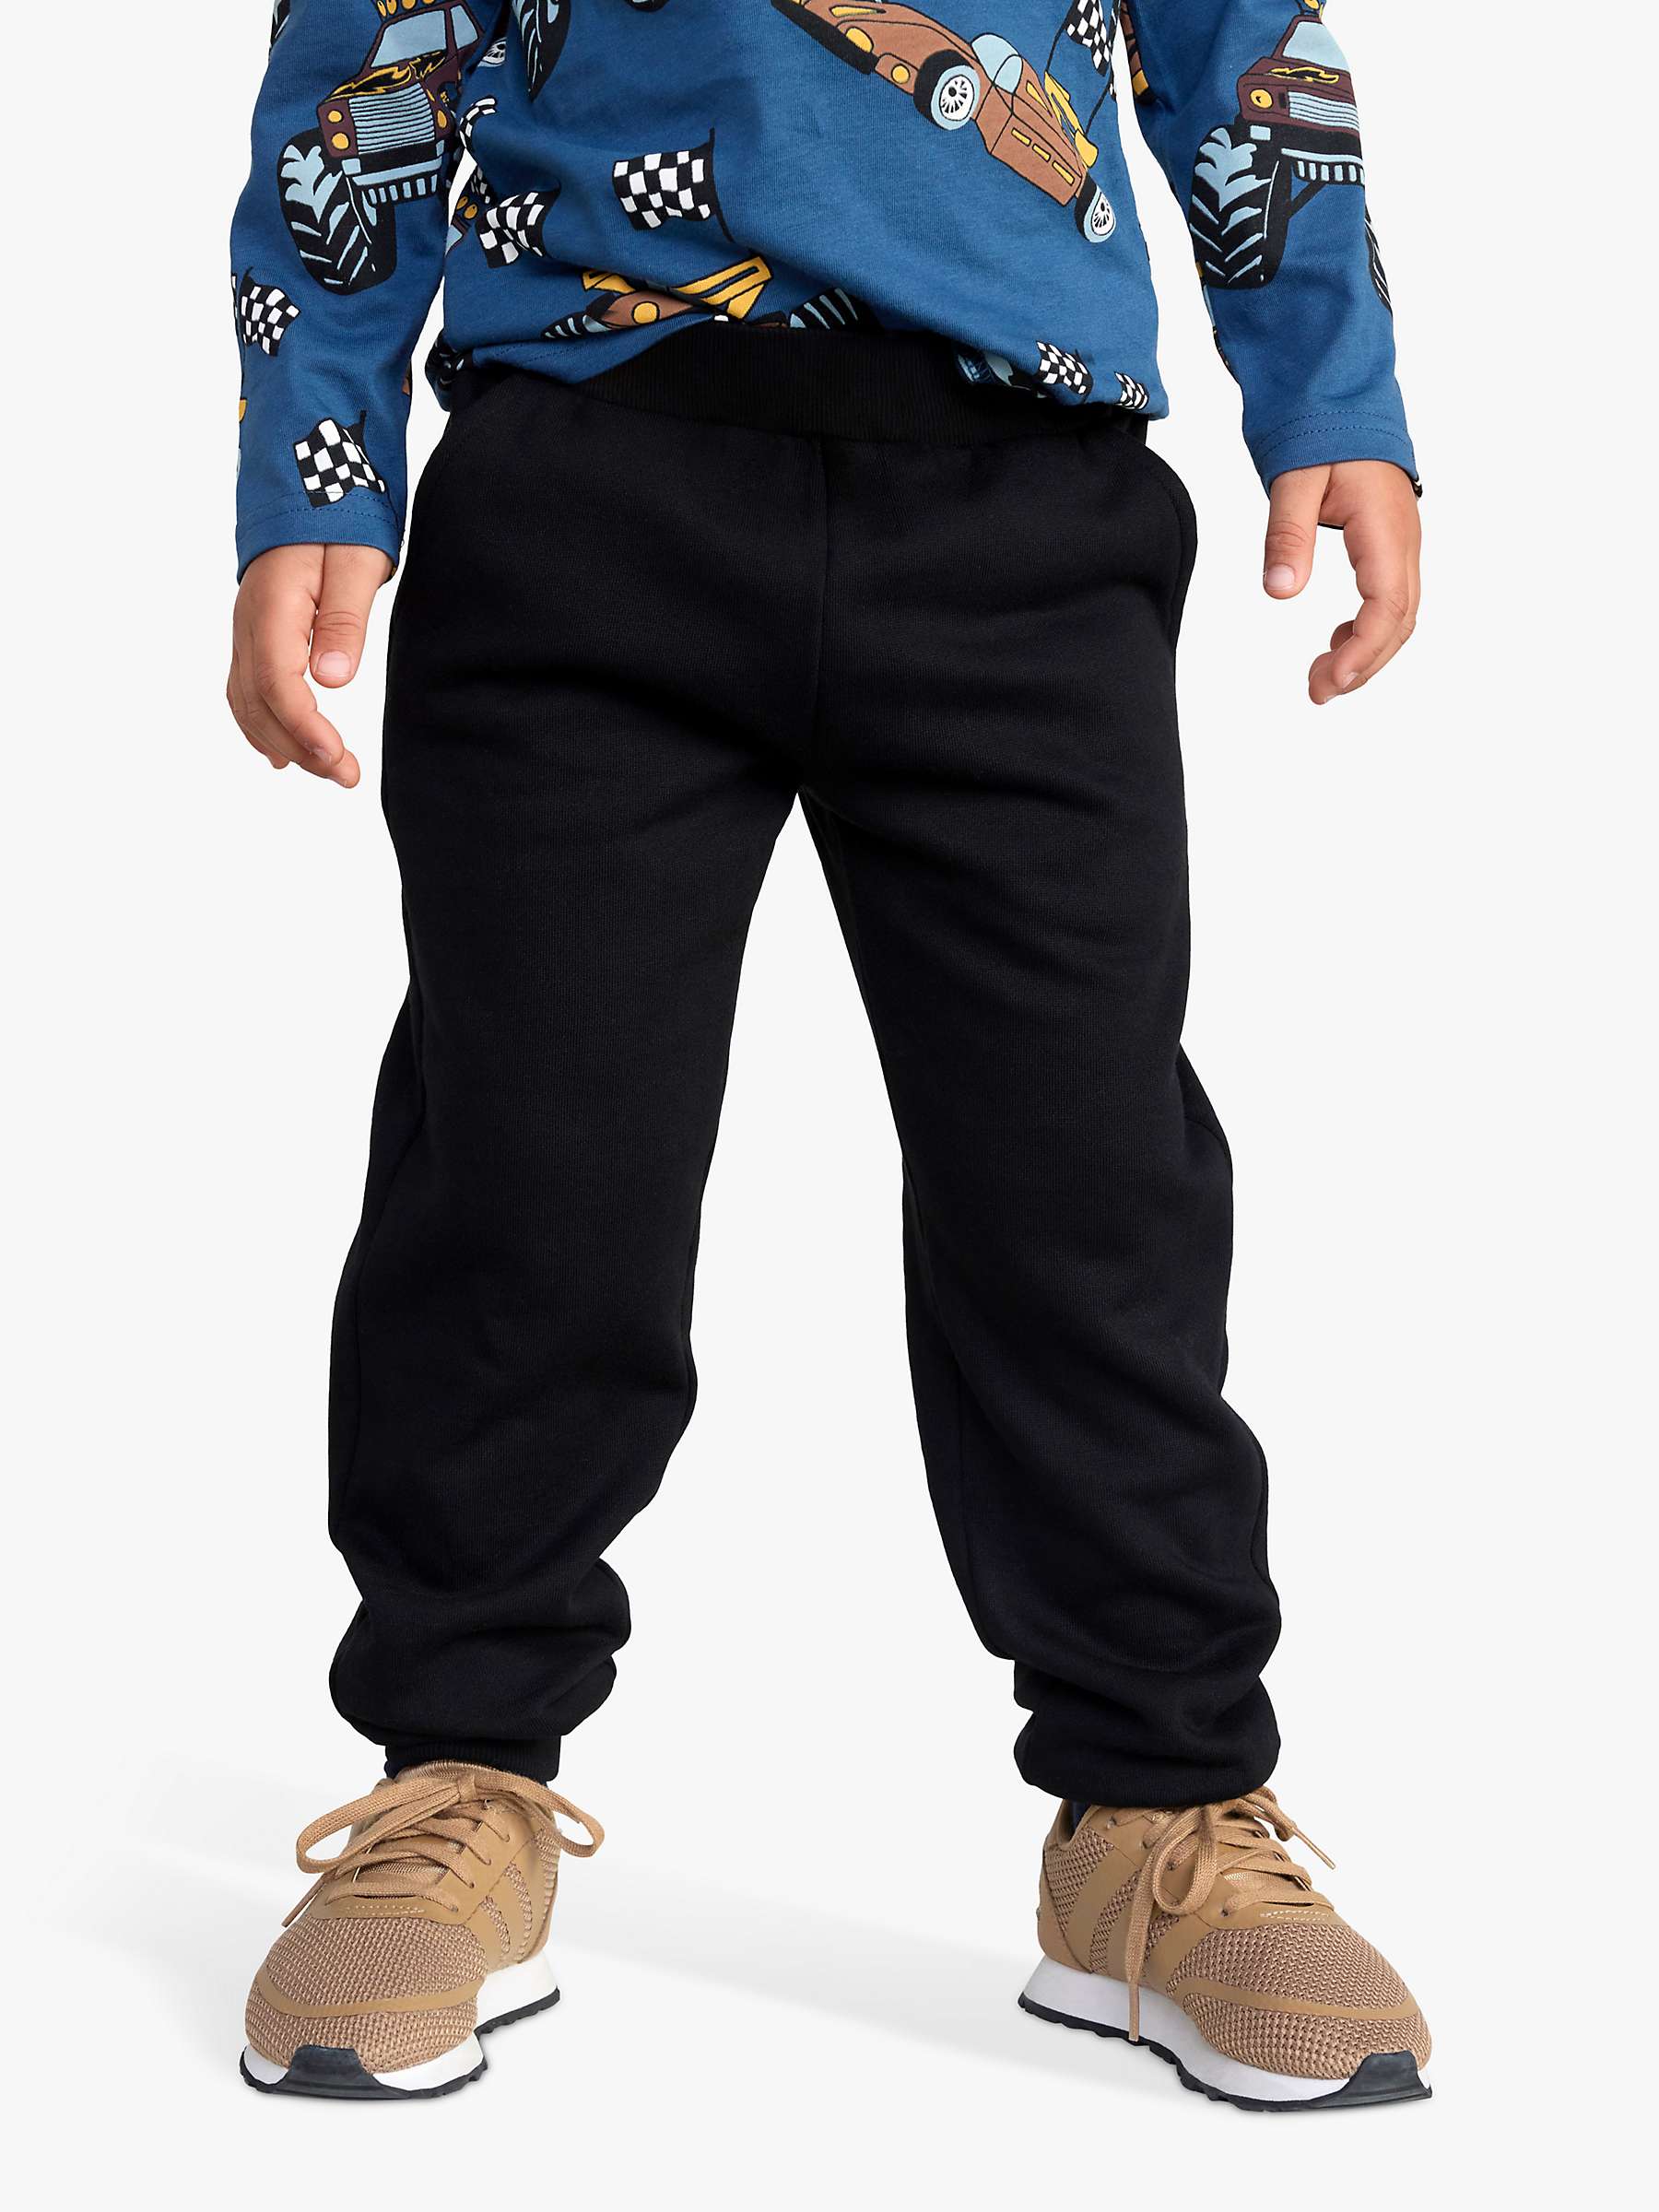 Buy Lindex Kids' Extra Durable Trousers, Black Online at johnlewis.com